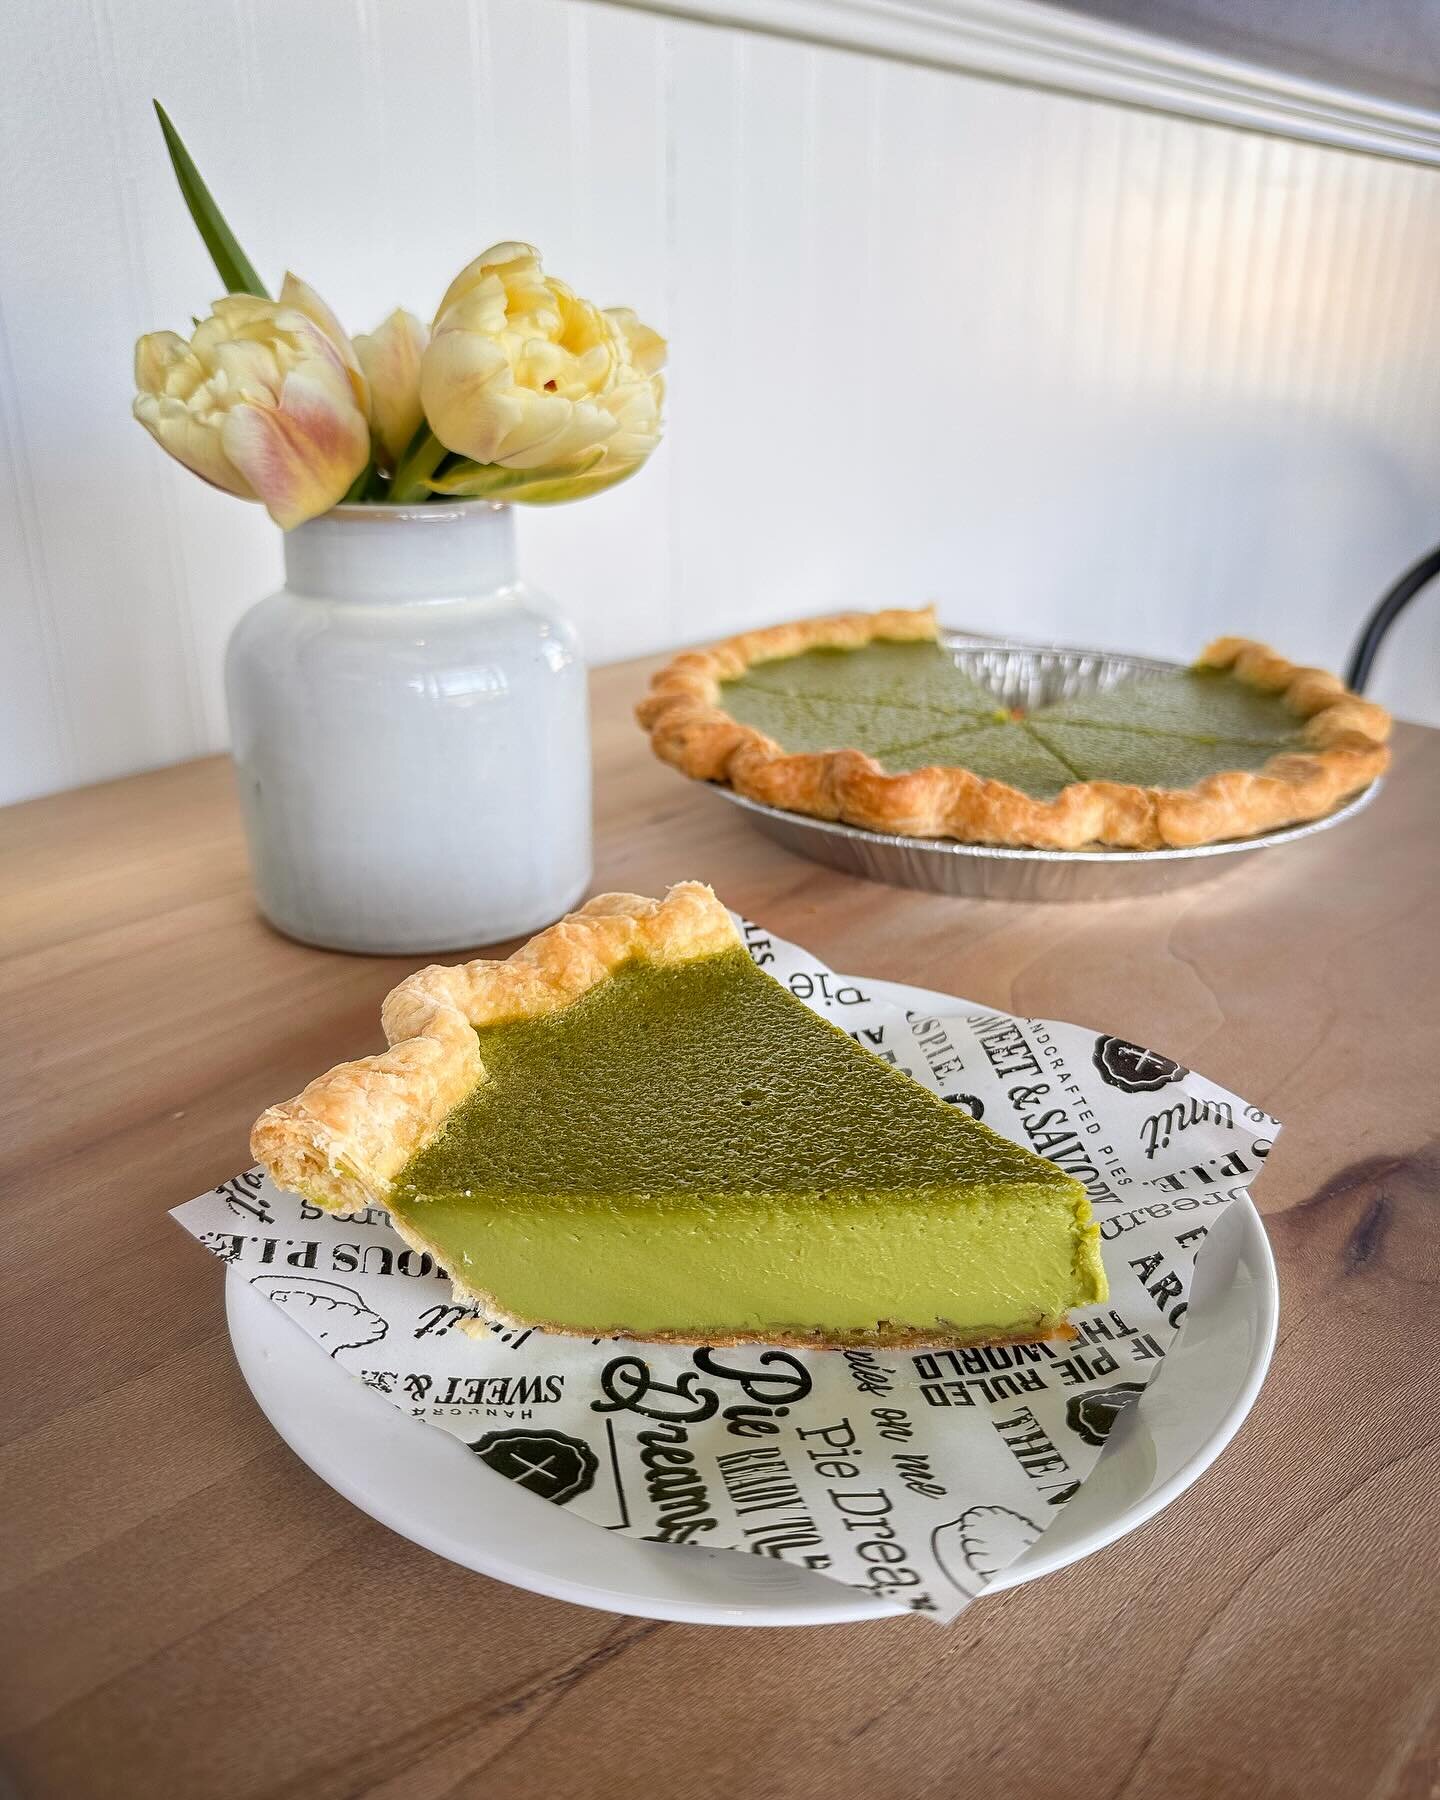 &ldquo;I&rsquo;m a great believer in luck, and I find the harder I work the more I have of it.&rdquo; &mdash; T. Jefferson
_____ 🥧🤞💭_____
📸: Matcha Custard thanks to our friends @mizubateaco and Pandan Custard!!

Wrapping up this weekend with a f